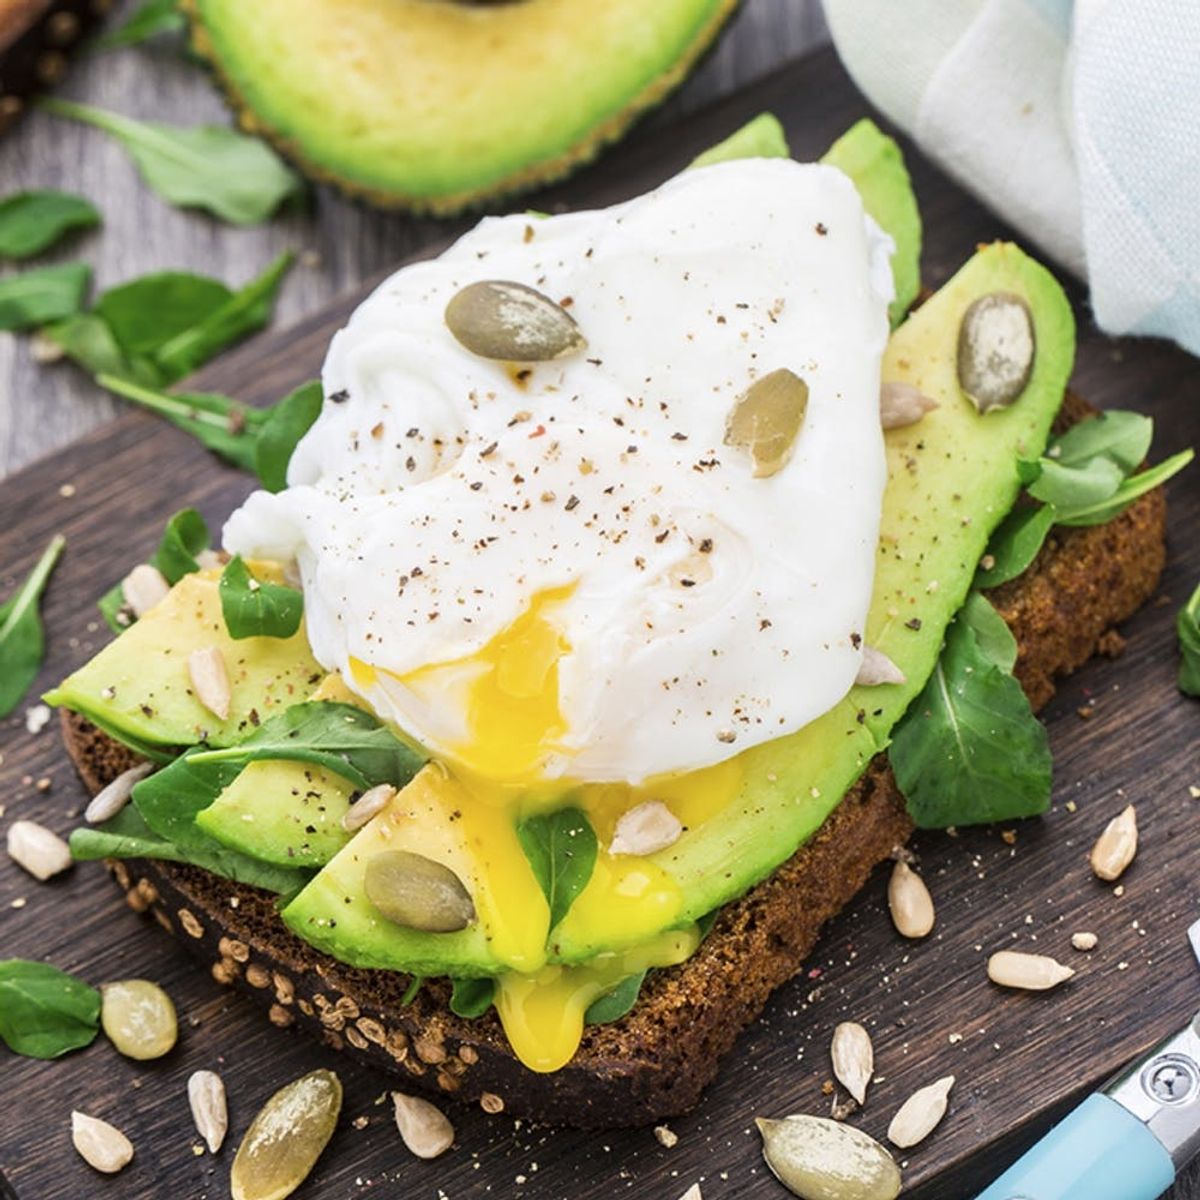 This Restaurant Has the 5 Course Avocado-Themed Brunch of Your Dreams